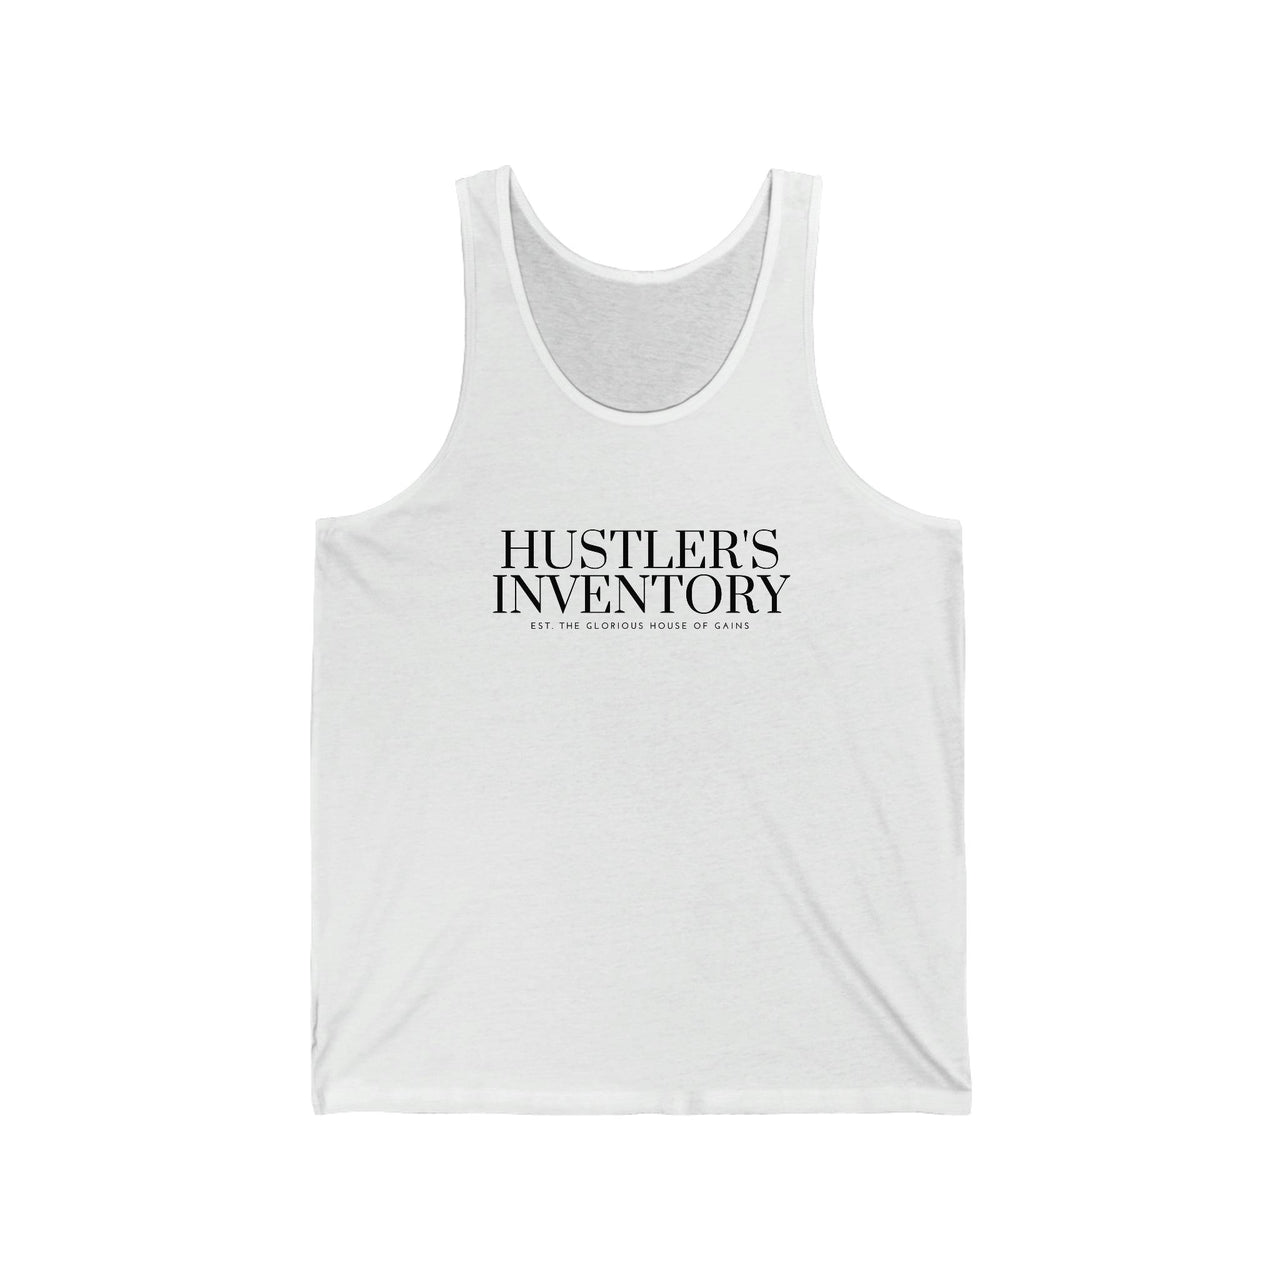 TankTop White Front Hustler' s Inventory Fitness Clothing